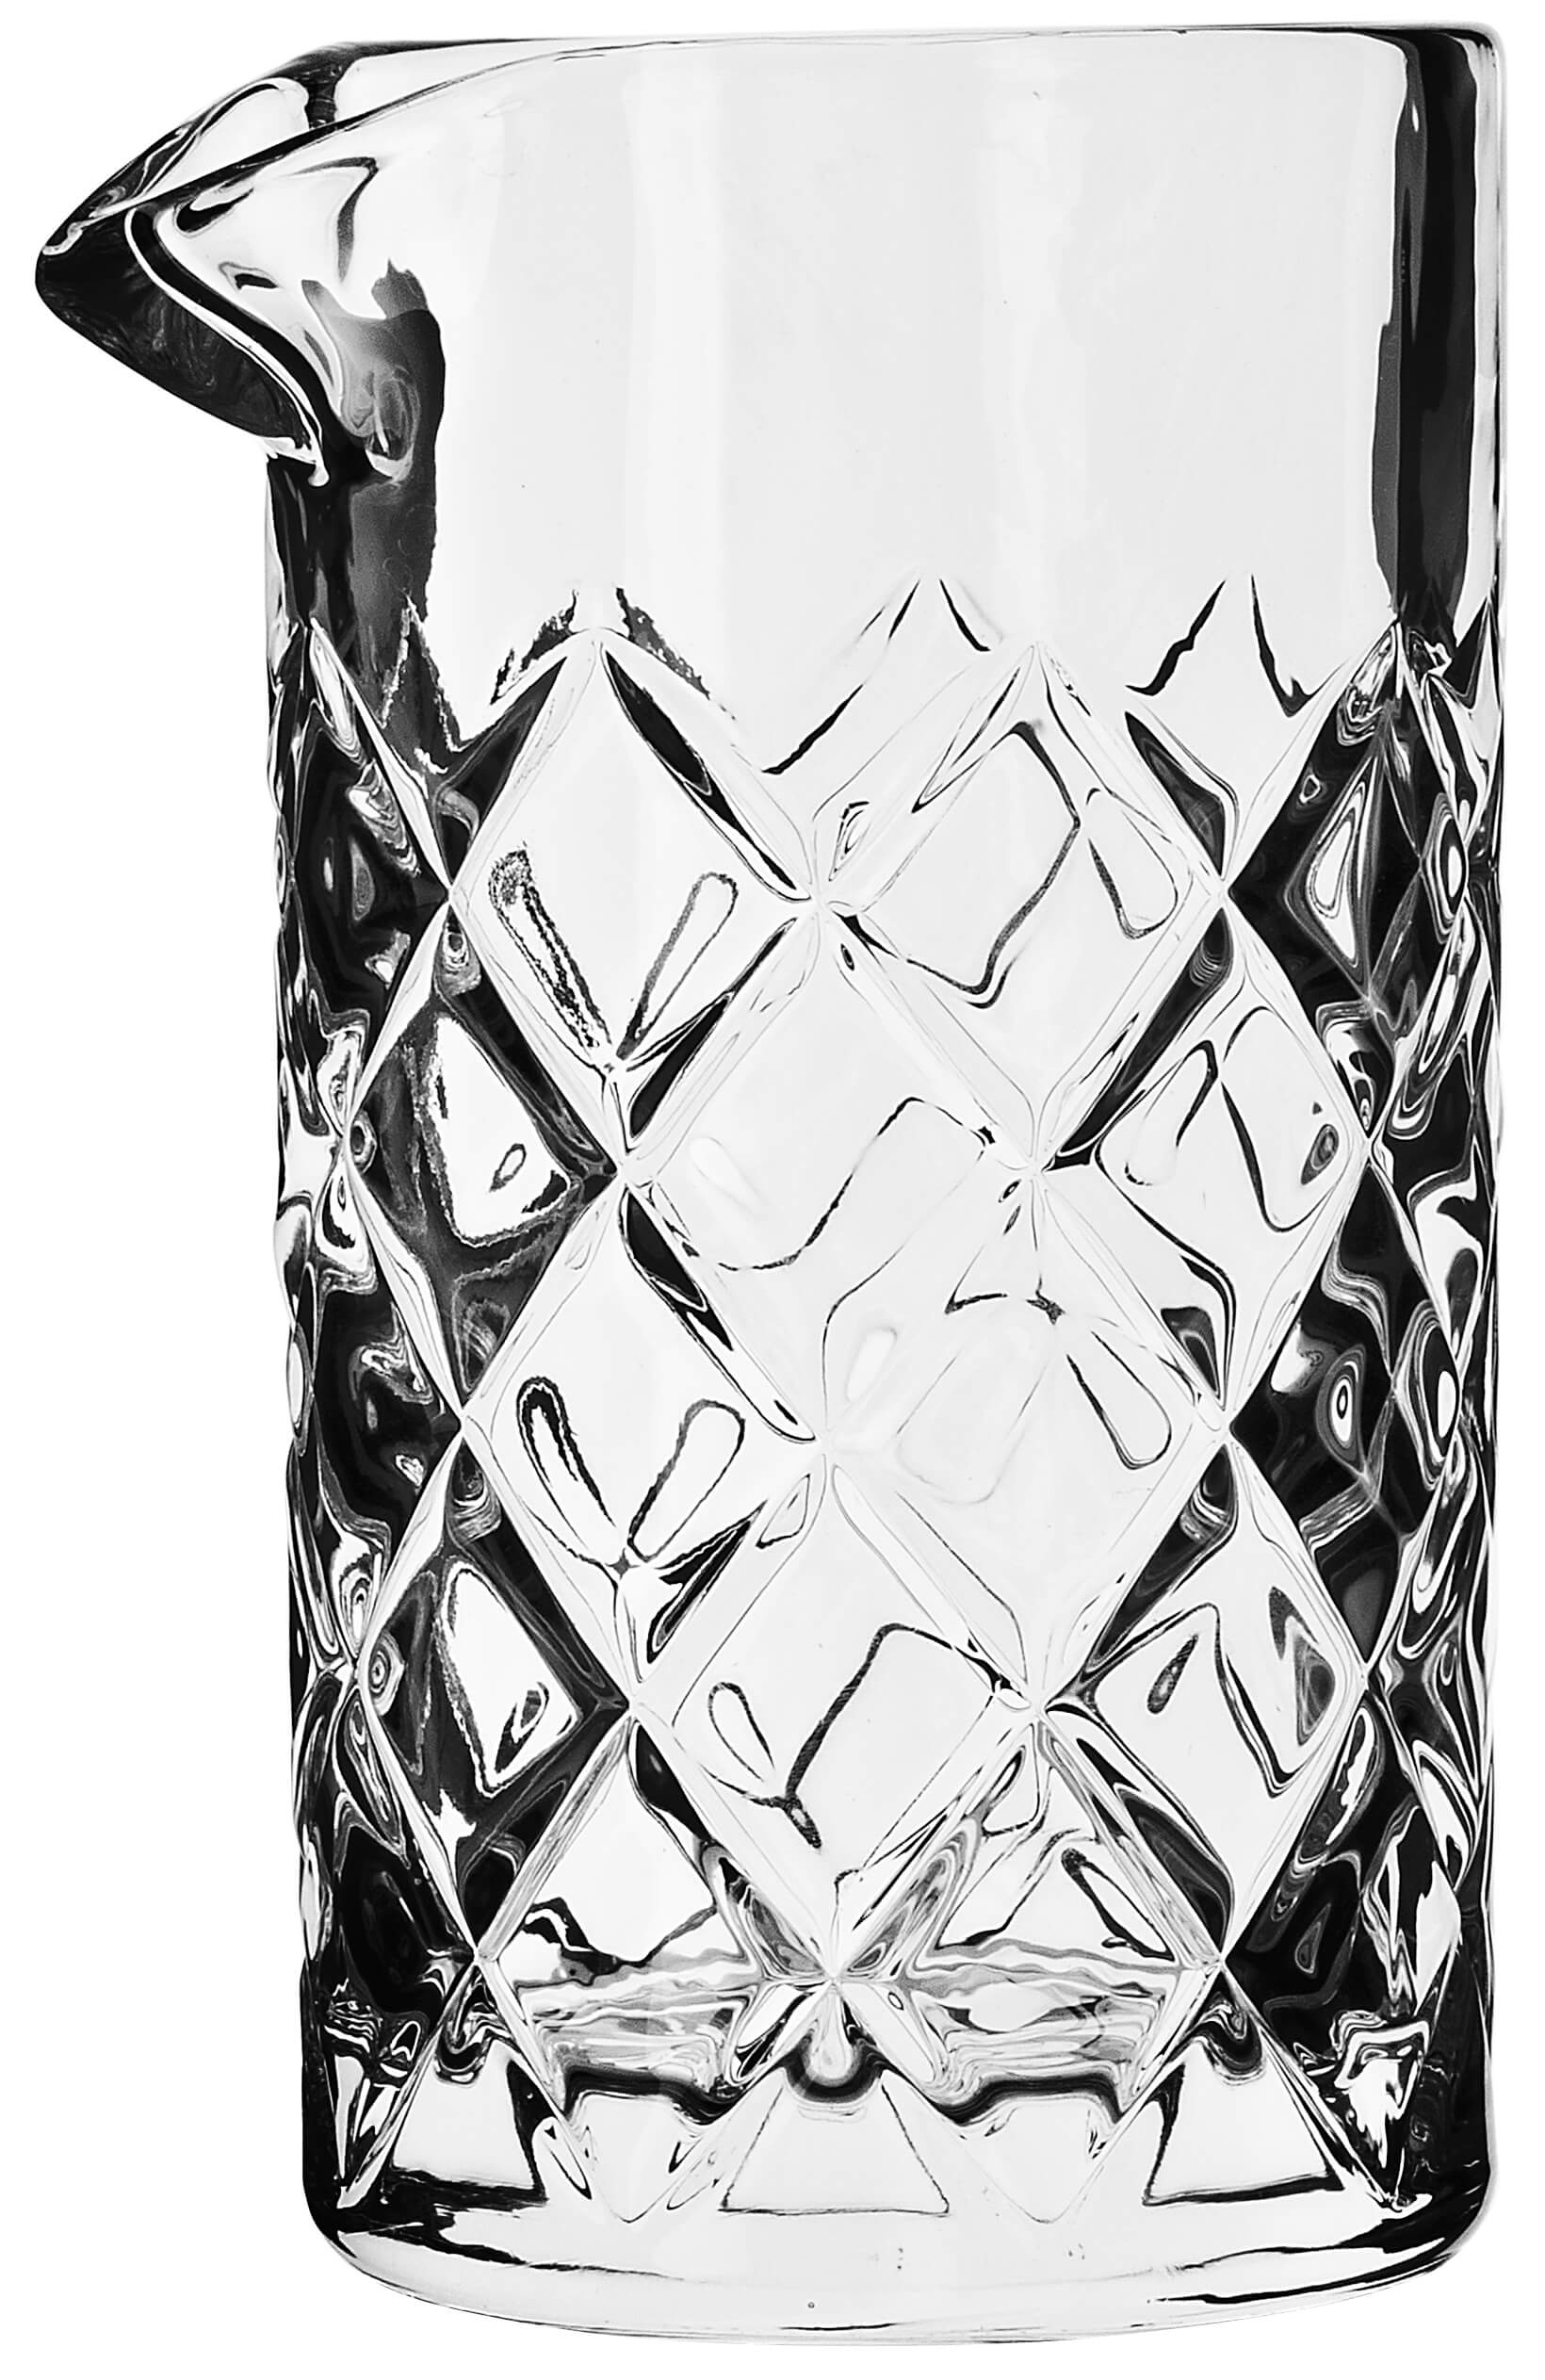 Mixing glass diamond cut tall, with pouring lip, Prime Bar - 770ml